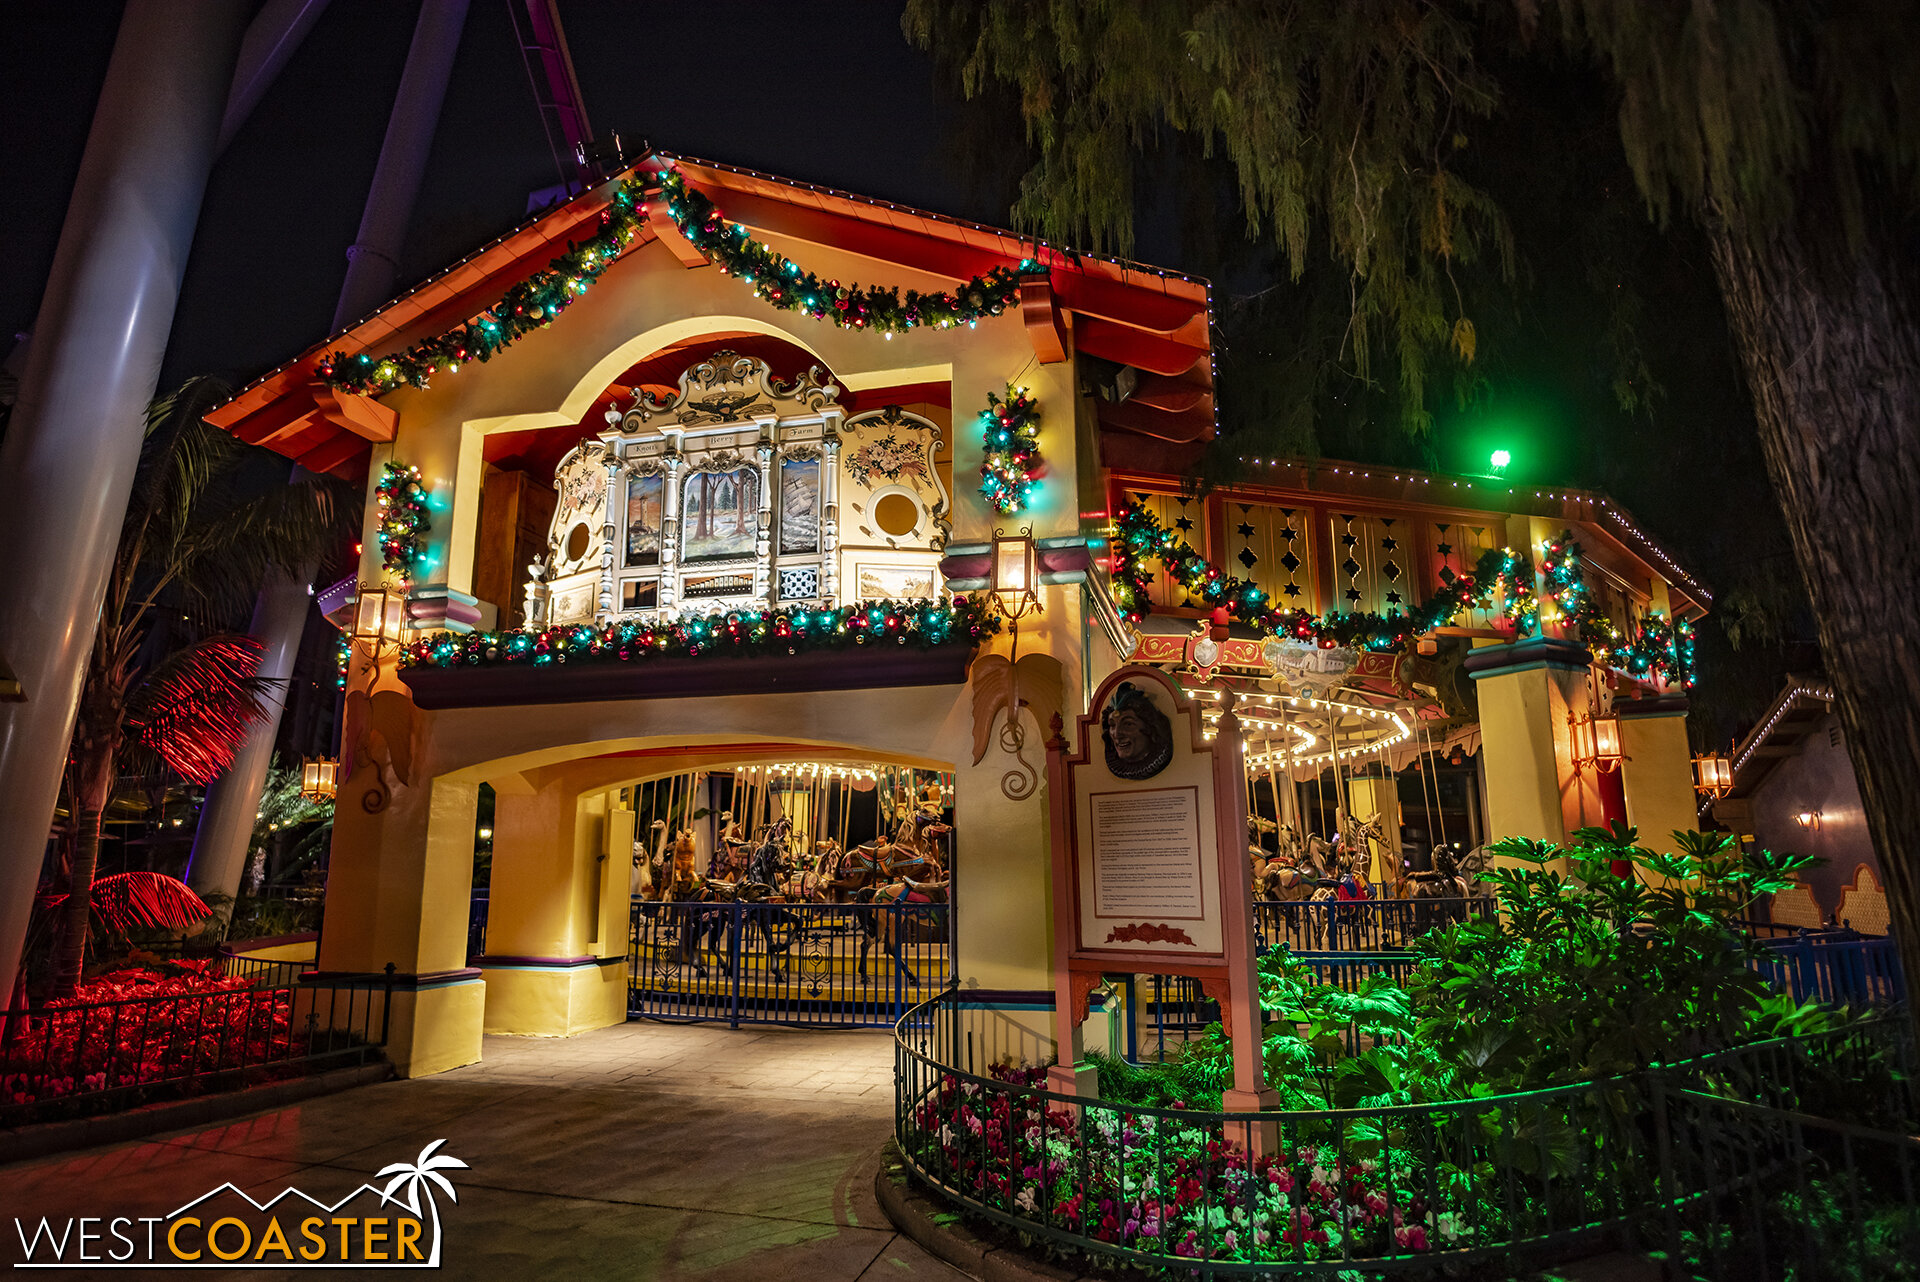  Where there are buildings, there are decorations, but Fiesta Village also has more open areas that lack the enveloping Christmas atmosphere that other parts of the land can feature. 